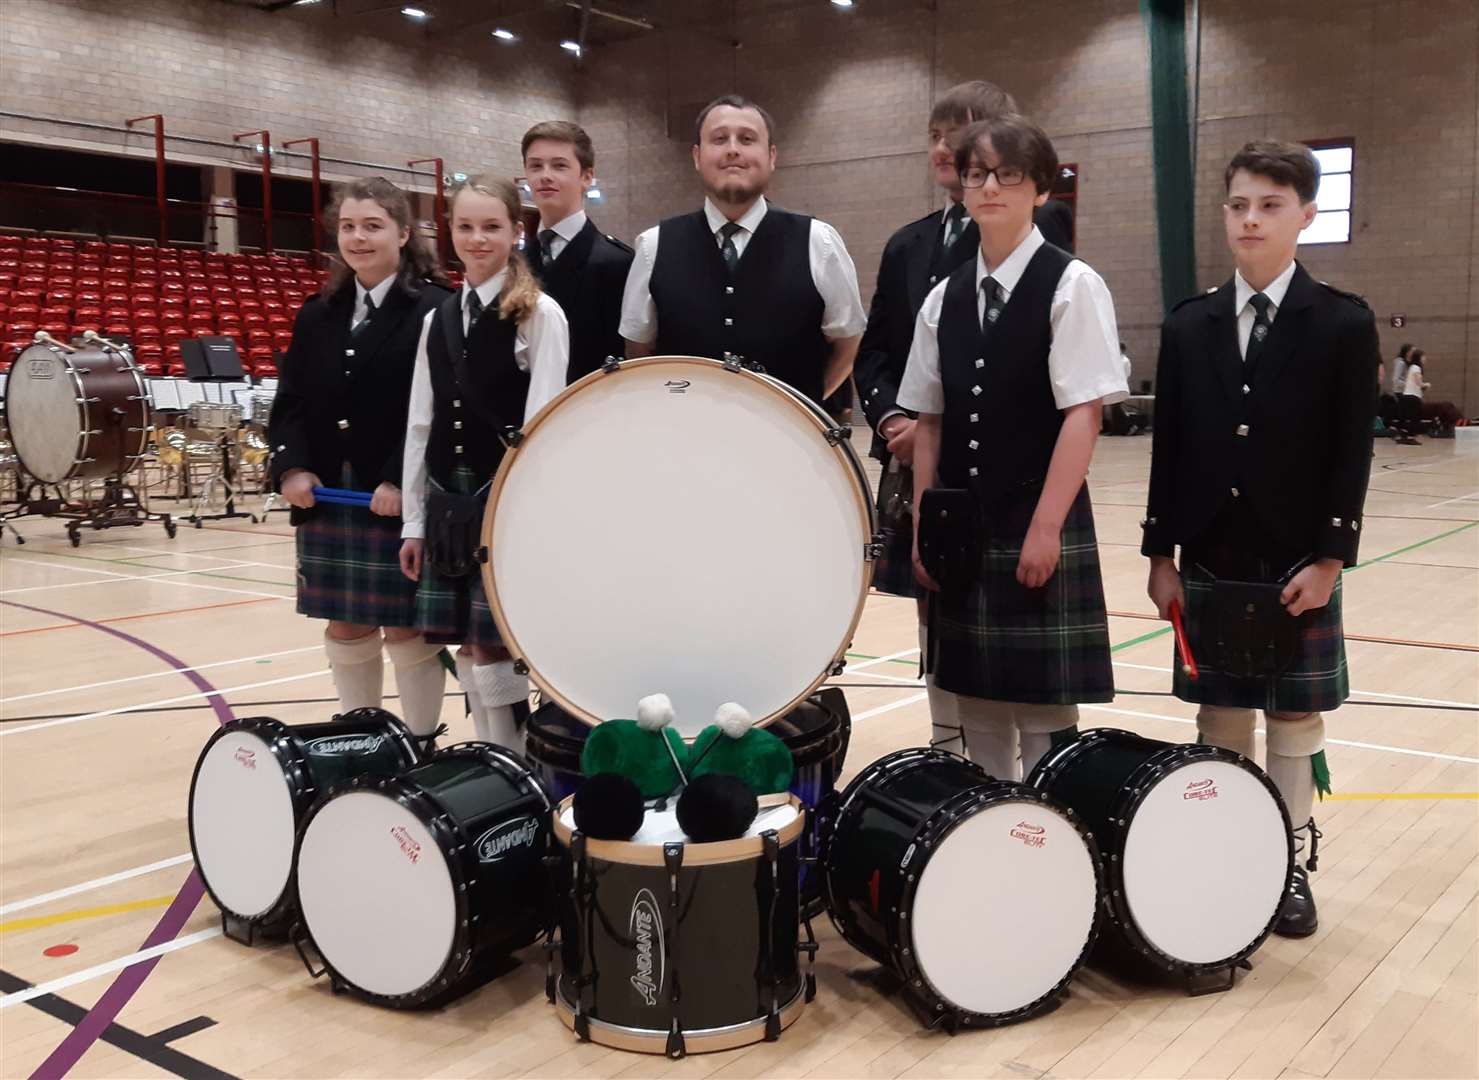 A group of seven drummers from Dornoch Pipe Band made up 50 percent of the drum core in a Highland Youth Pipe Band